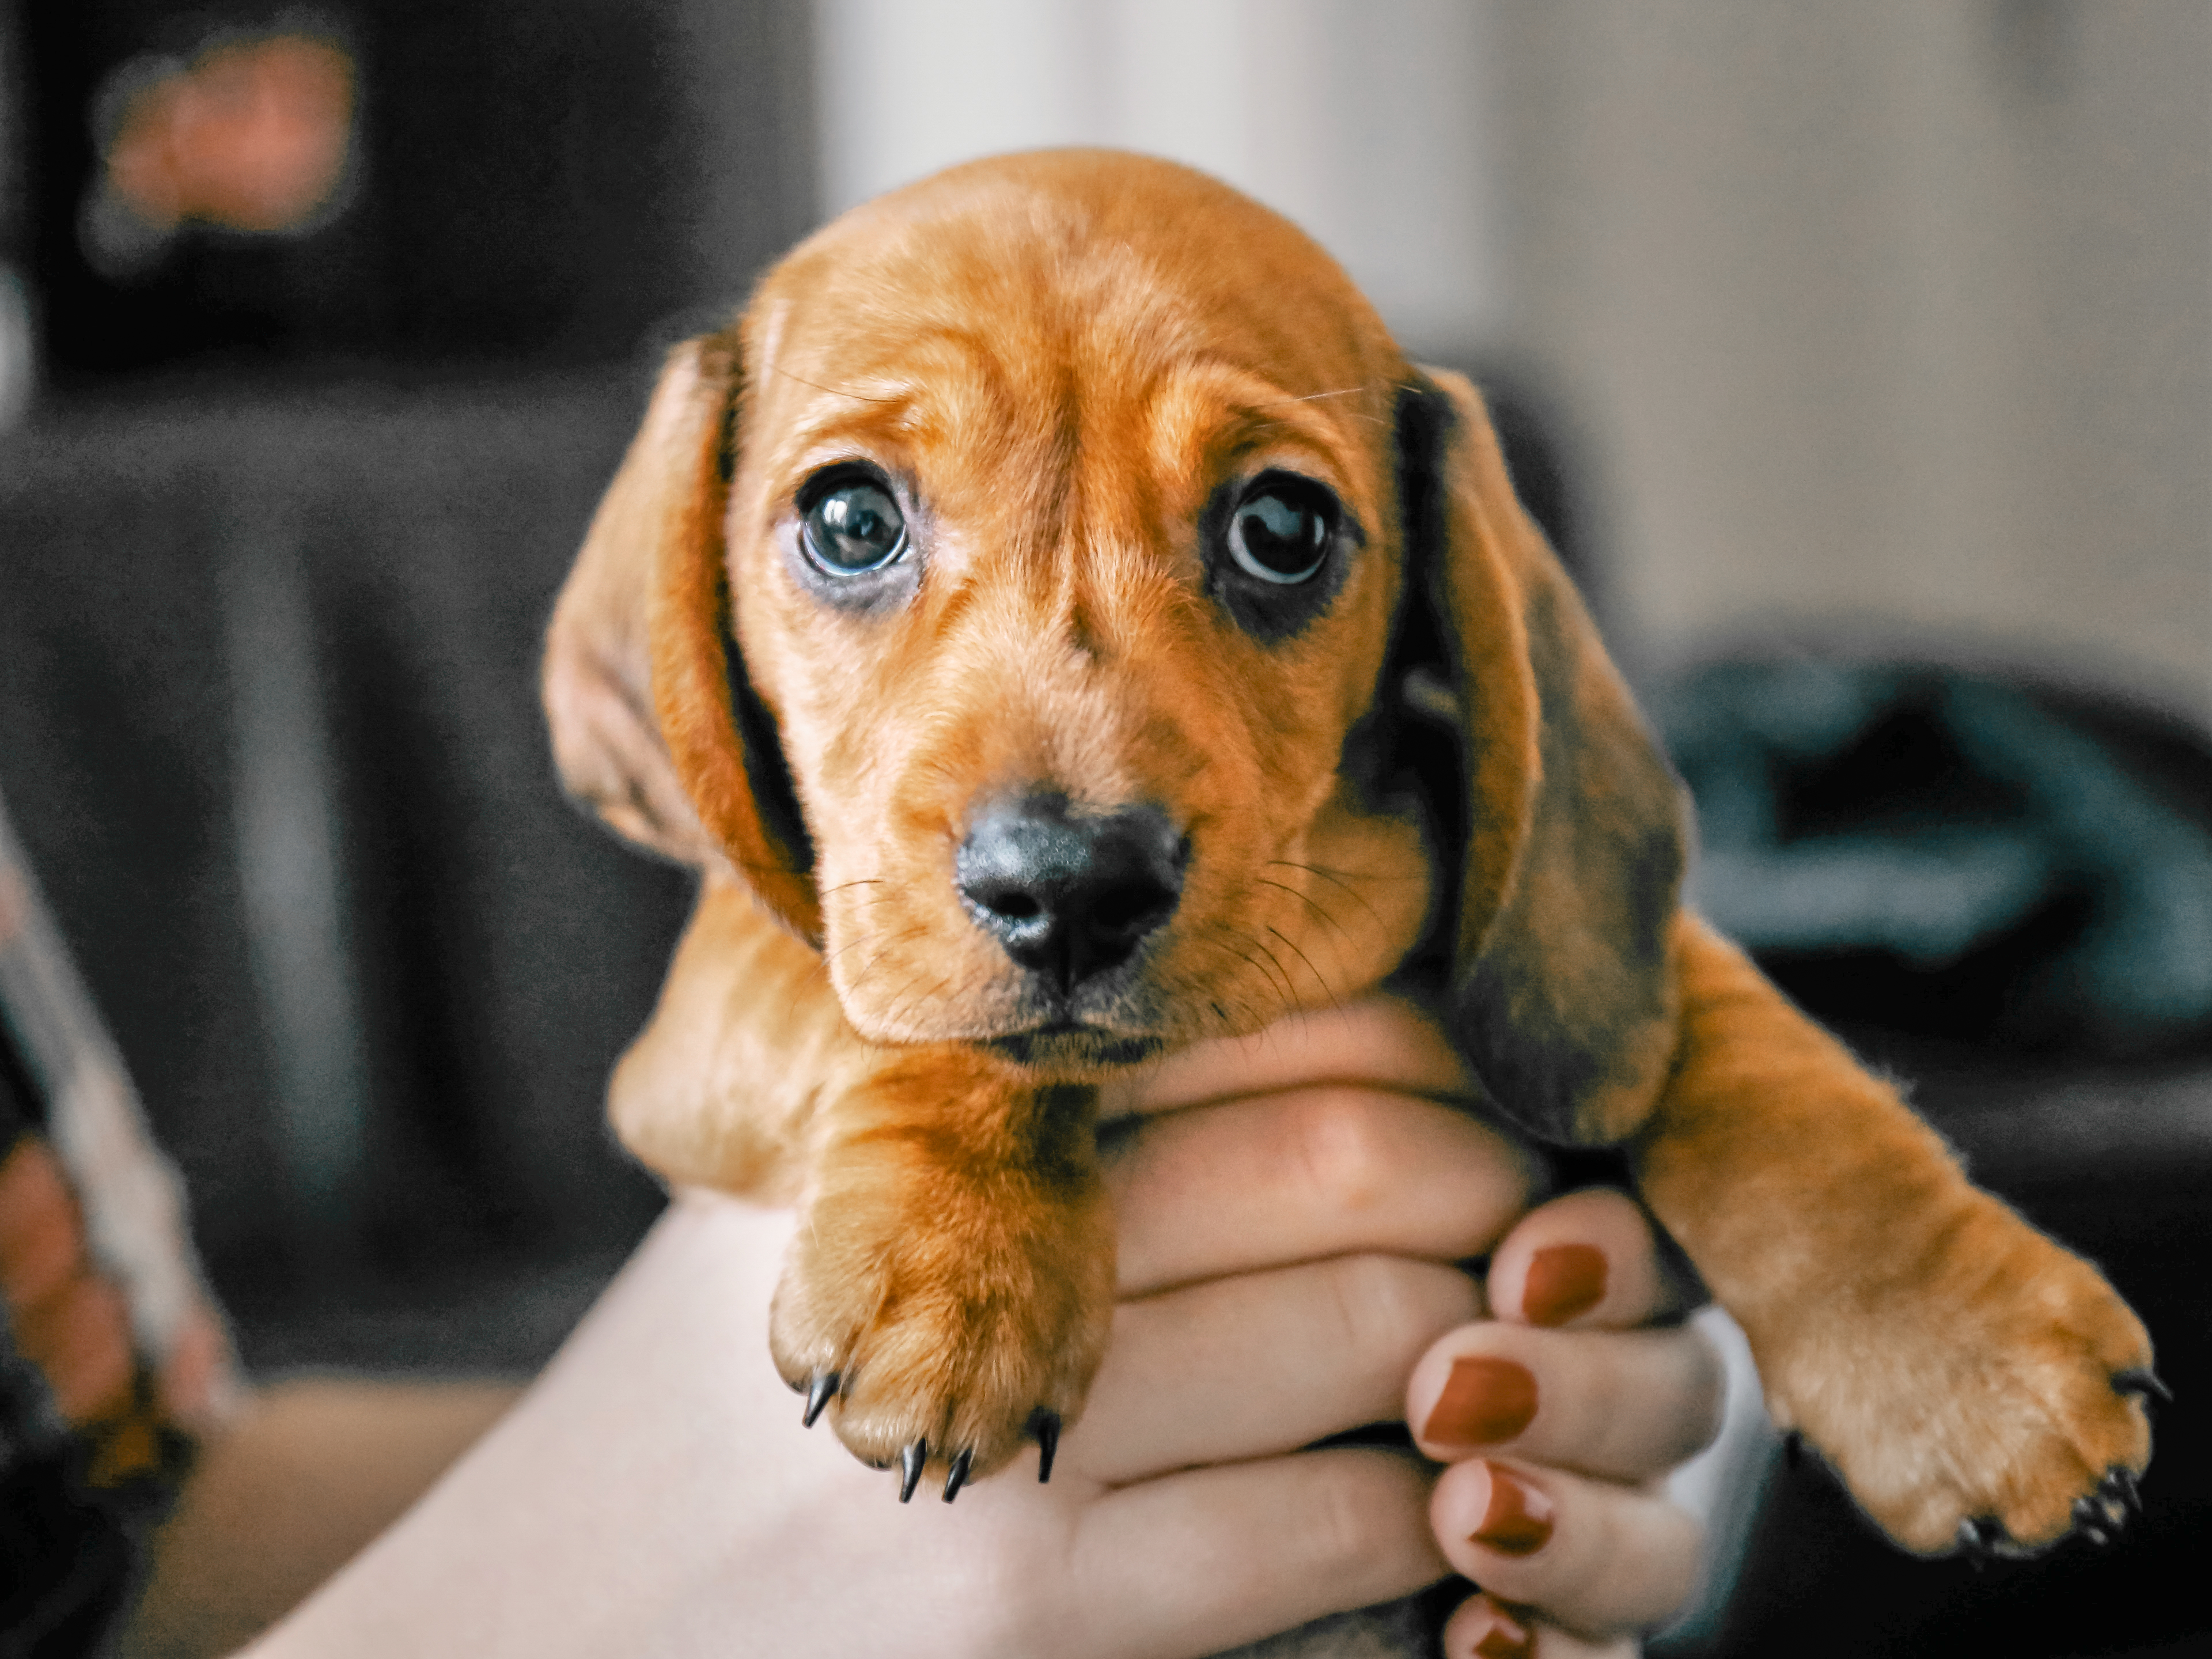 Dachshund puppy being held by owner